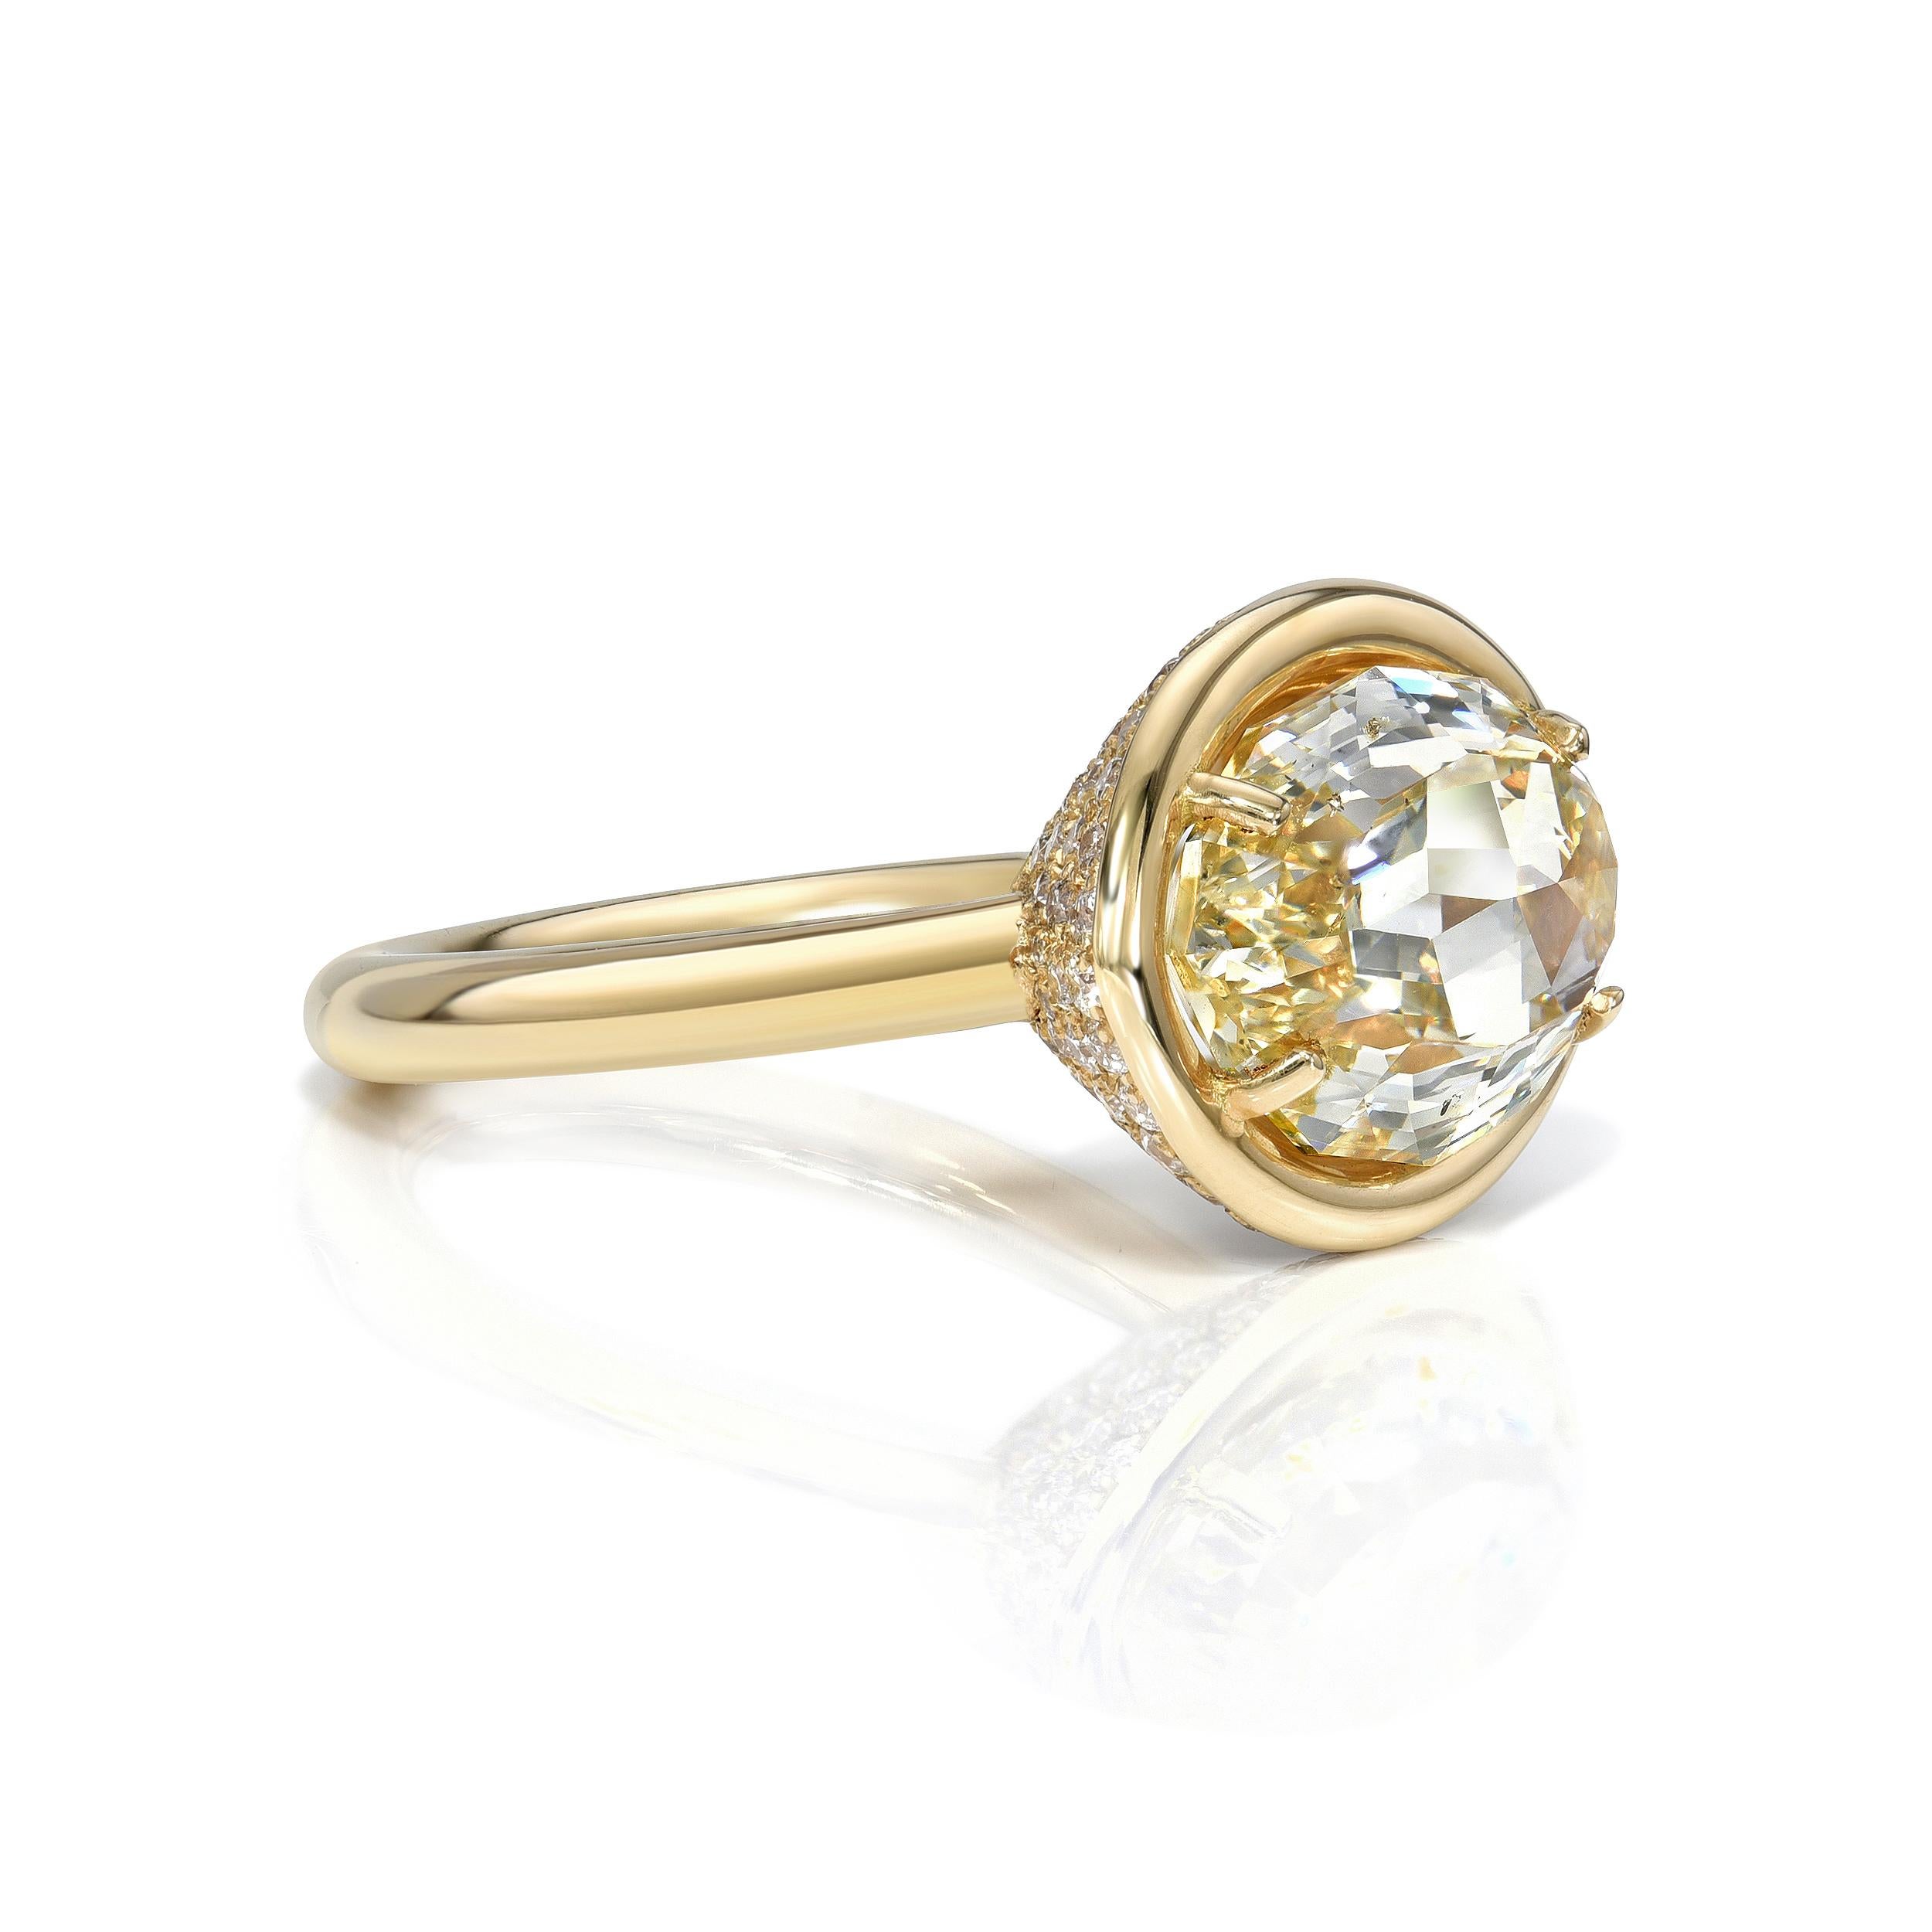 5.21ct Fancy Lt. Browish Yellow/SI2 GIA certified oval cut diamond with 0.85ctw old European cut accent diamonds set in a handcrafted 18K yellow gold mounting.